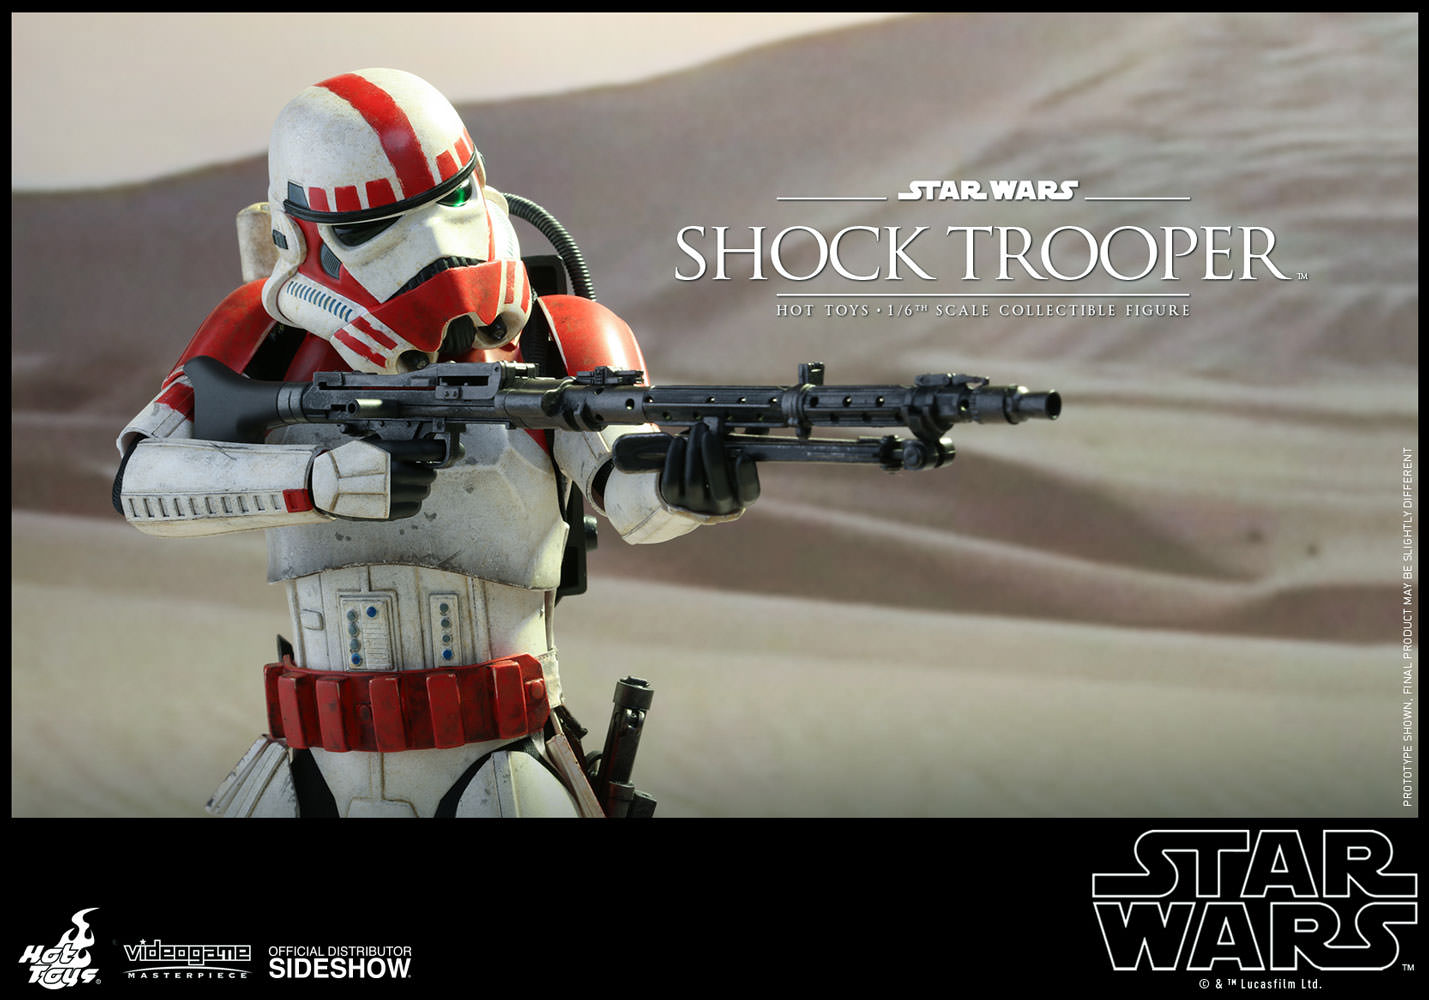 Star Wars Shock Trooper Sixth Scale Figure By Hot Toys Sideshow Collectibles